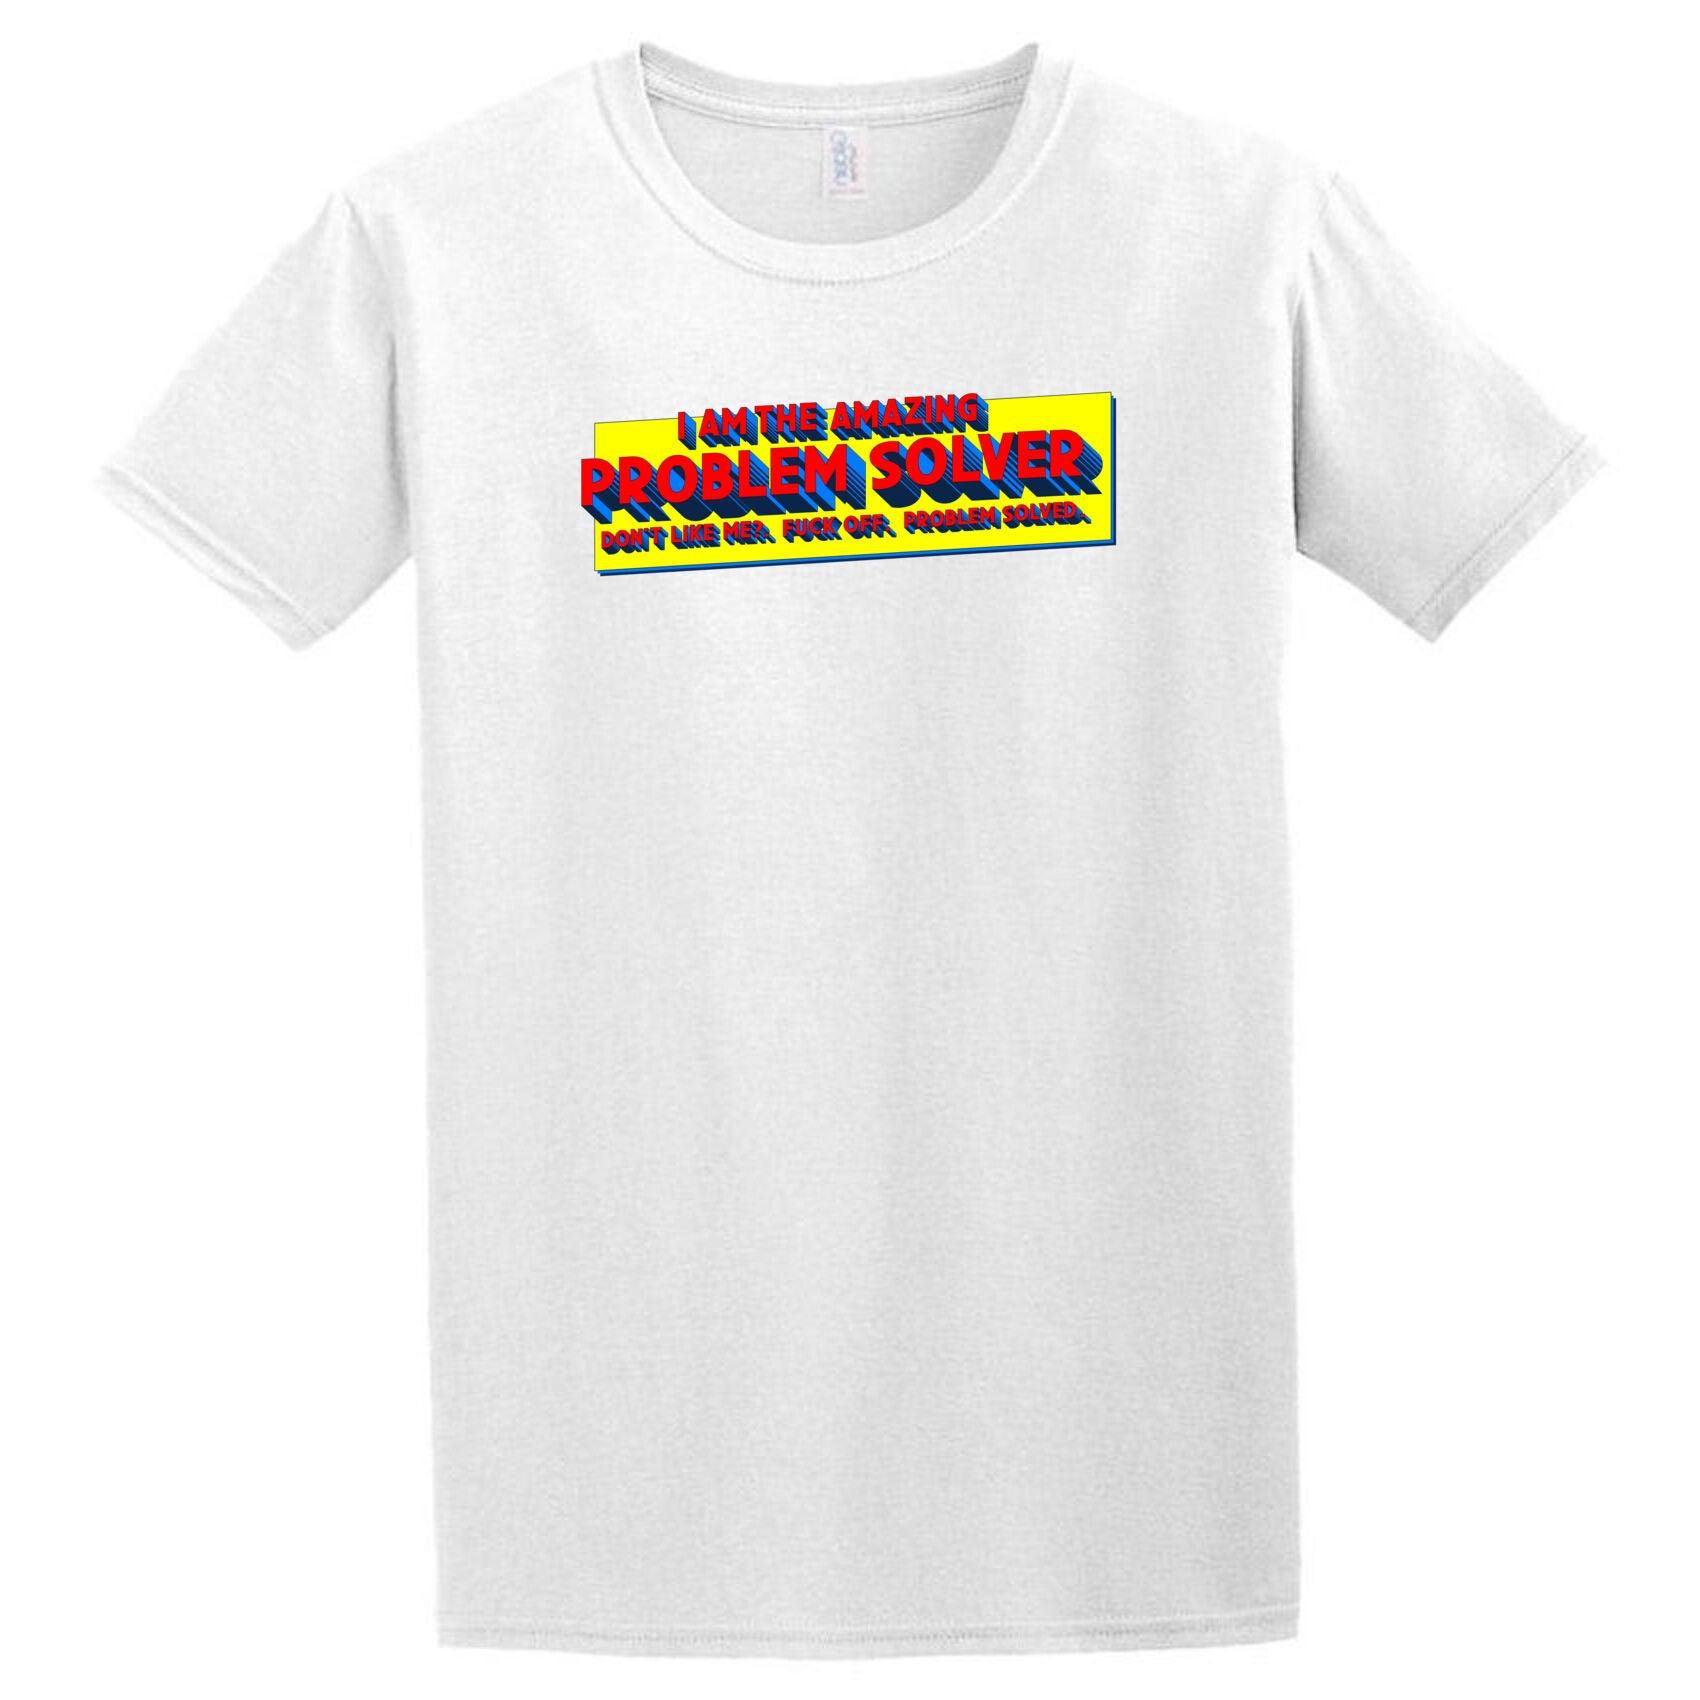 A Problem Solver T-Shirt from Twisted Gifts with a yellow, blue and red logo.